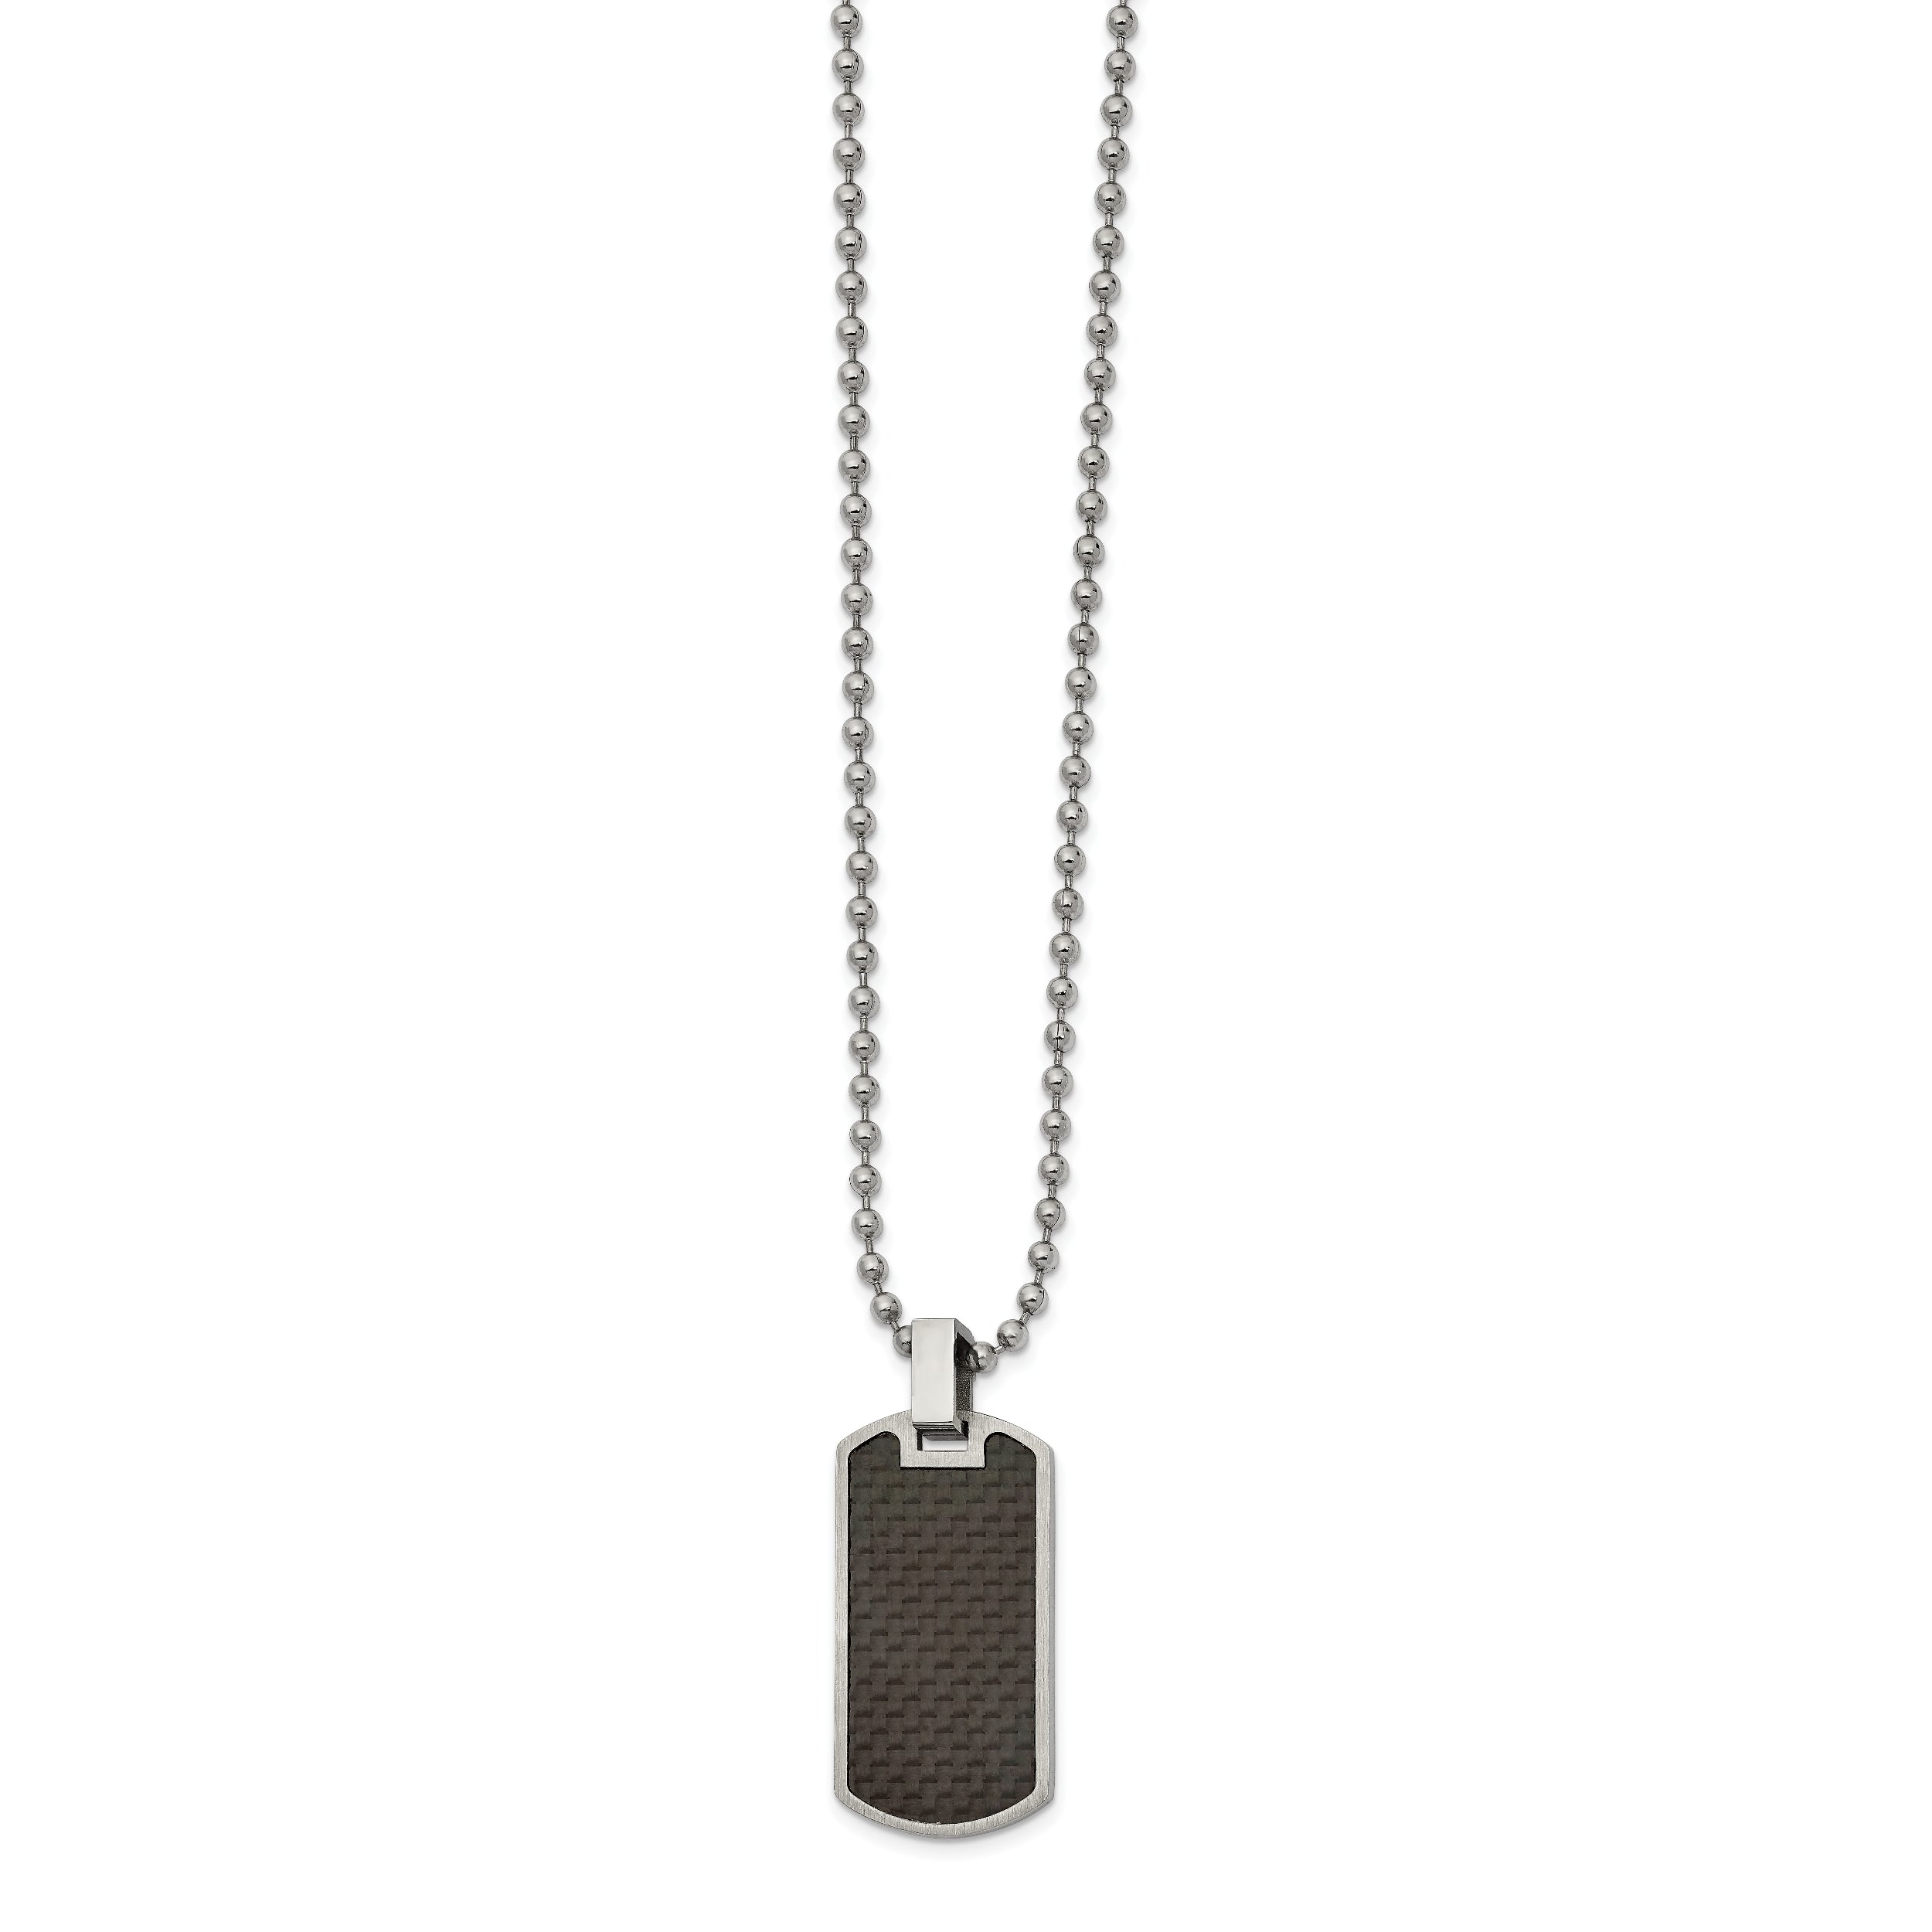 Chisel Stainless Steel Brushed and Polished with Black Carbon Fiber Inlay Dog Tag on a 22 inch Ball Chain Necklace